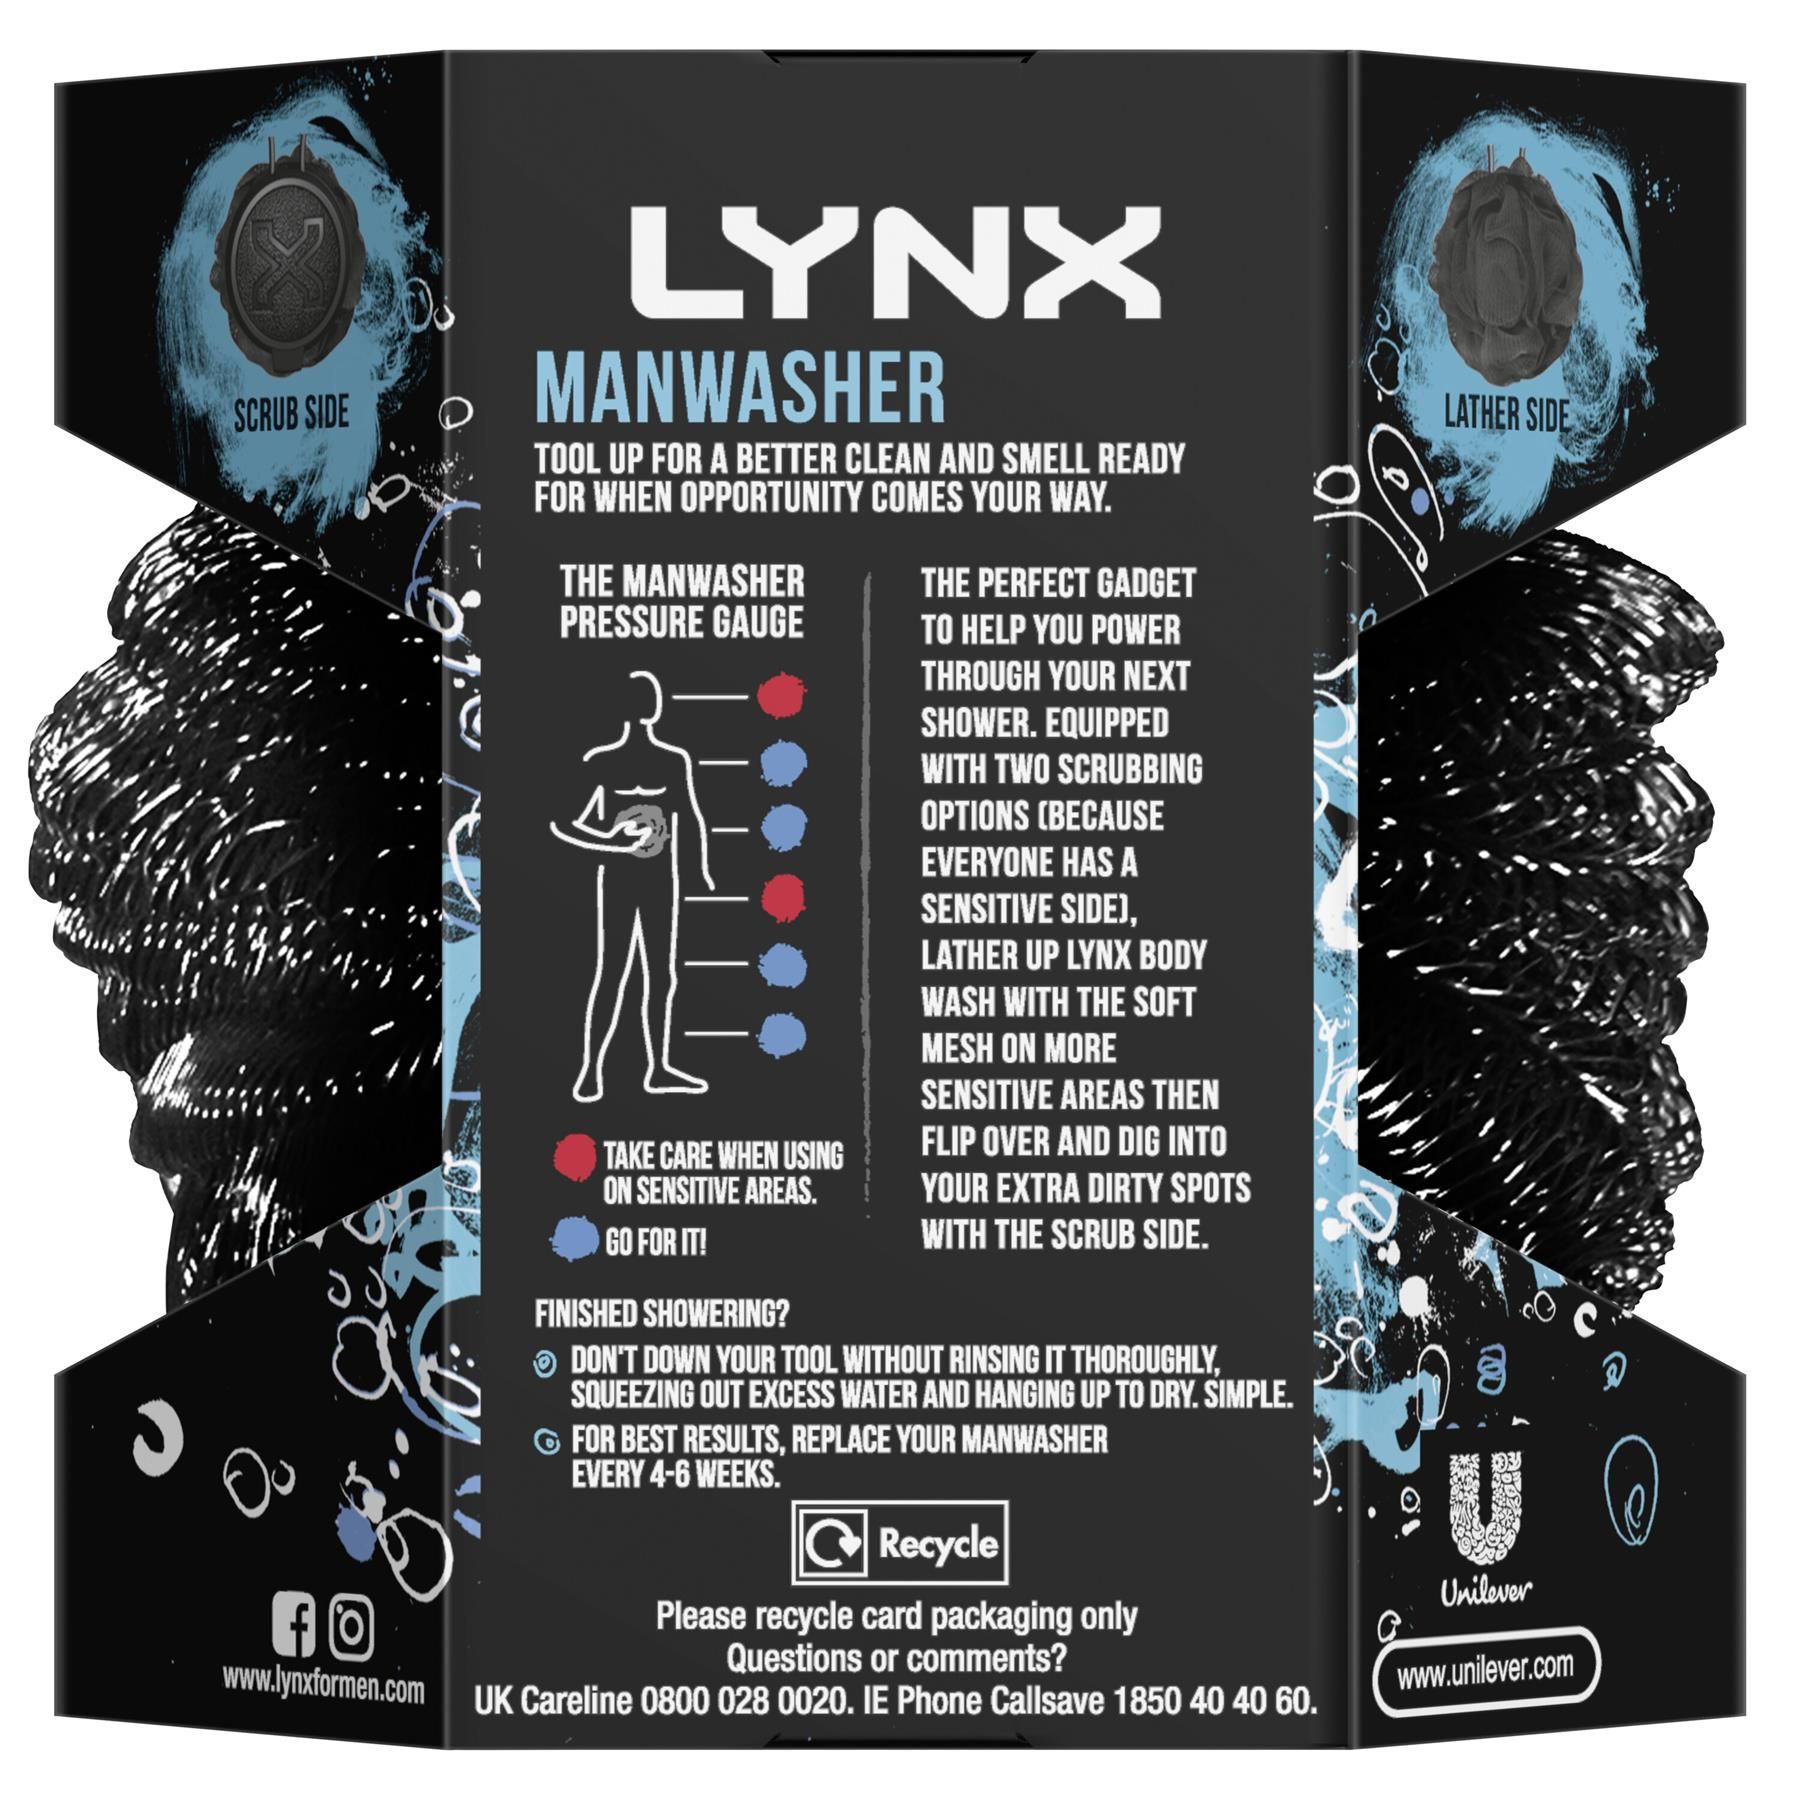 Lynx Manwasher 2-Sided Showe Tool For A Better Clean & Smell Ready.  A great day starts with a great shower and there’s no greater shower than a Lynx shower. The Lynx Manwasher is designed to work with your favourite Lynx Shower Gel to keep every part of you smelling ready. Tool up for a better clean and smell ready for when the opportunity comes your way. The perfect gadget to help you power through your next shower. 

Equipped with 2 scrubbing options because everyone has a sensitive side. Lather up Lynx Bodywash with the soft mesh on more sensitive areas, then flip over and dig into your extra dirty body spots with the scrub side. Don't down your tool without rinsing it thoroughly, squeezing out excess water and hanging up to dry. Simple. Don't down your tool without rinsing it thoroughly, squeezing out excess water and hanging up to dry. Simple.

Features:
Tool up for a better clean and smell ready for when the opportunity comes your way.
The perfect gadget to help you power through your next shower.
Equipped with 2 scrubbing options because everyone has a sensitive side.
Lather up Lynx Bodywash with the soft mesh on more sensitive areas, then flip over and dig into your extra dirty body spots with the scrub side.
Don't down your tool without rinsing it thoroughly, squeezing out excess water and hanging up to dry. Simple.
For best results, replace your man washer every 4-6 weeks.

Safety Warning: Take care when using sensitive areas. For best results, replace your Manwasher ever 4-6 weeks.